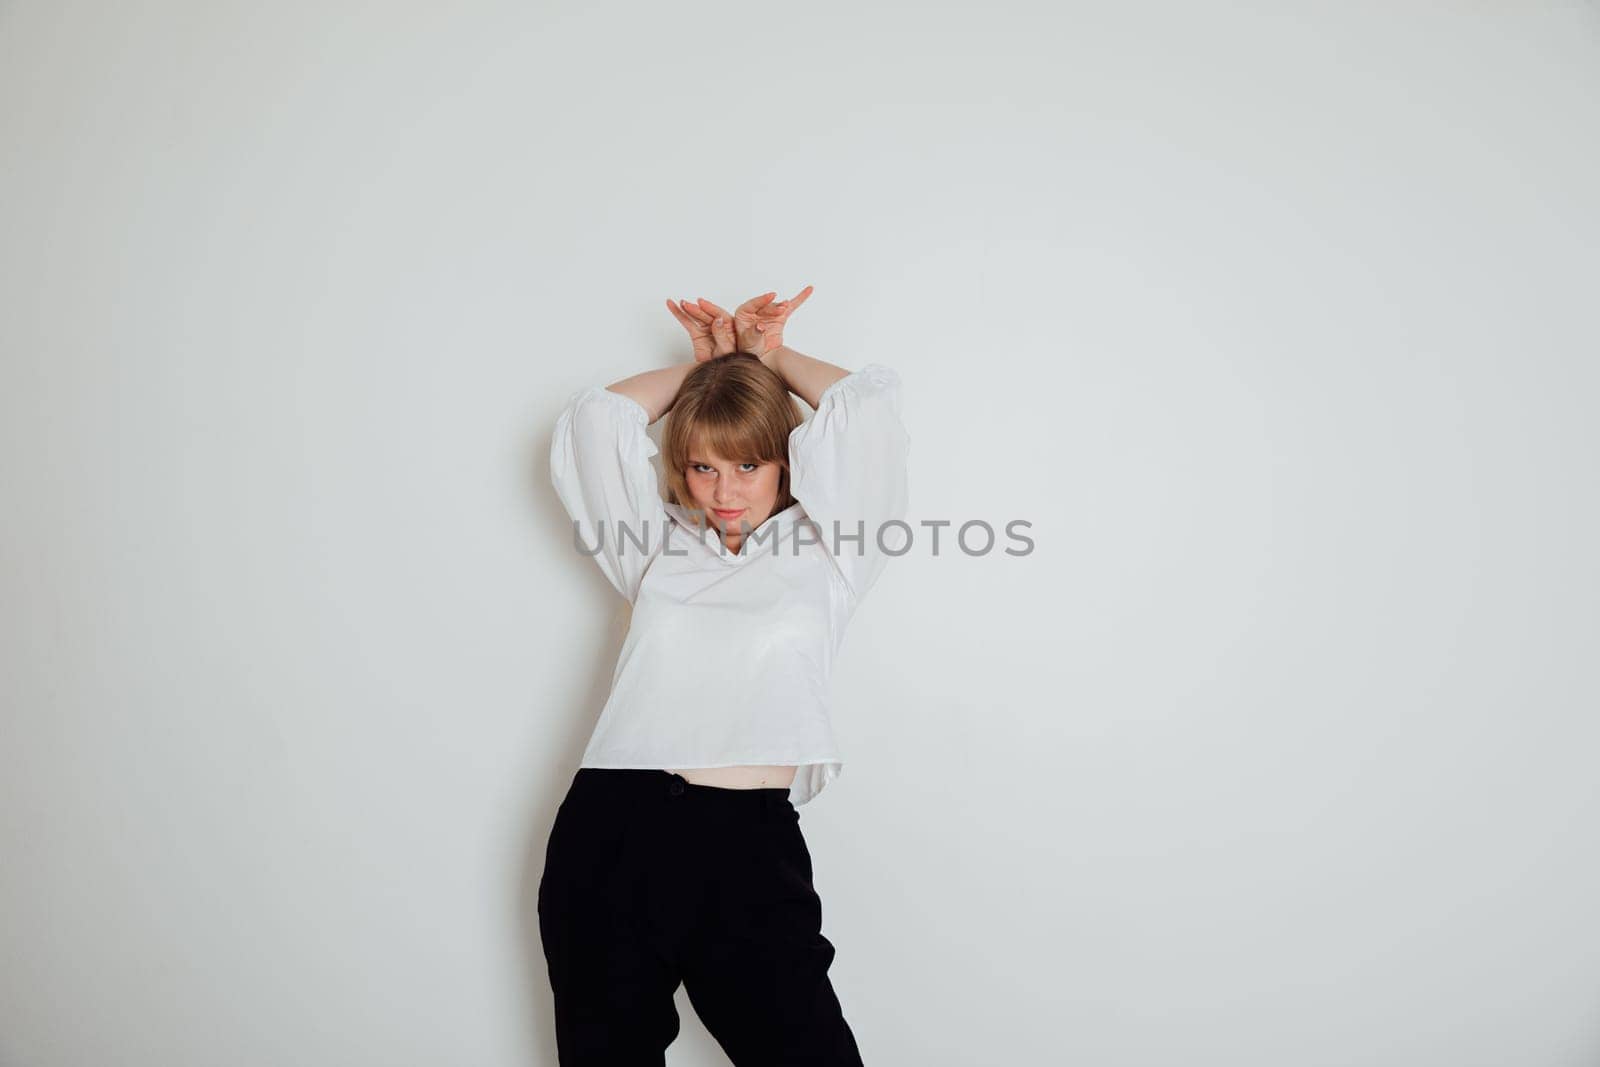 Beautiful young woman showing bunny ears with her hands by Simakov